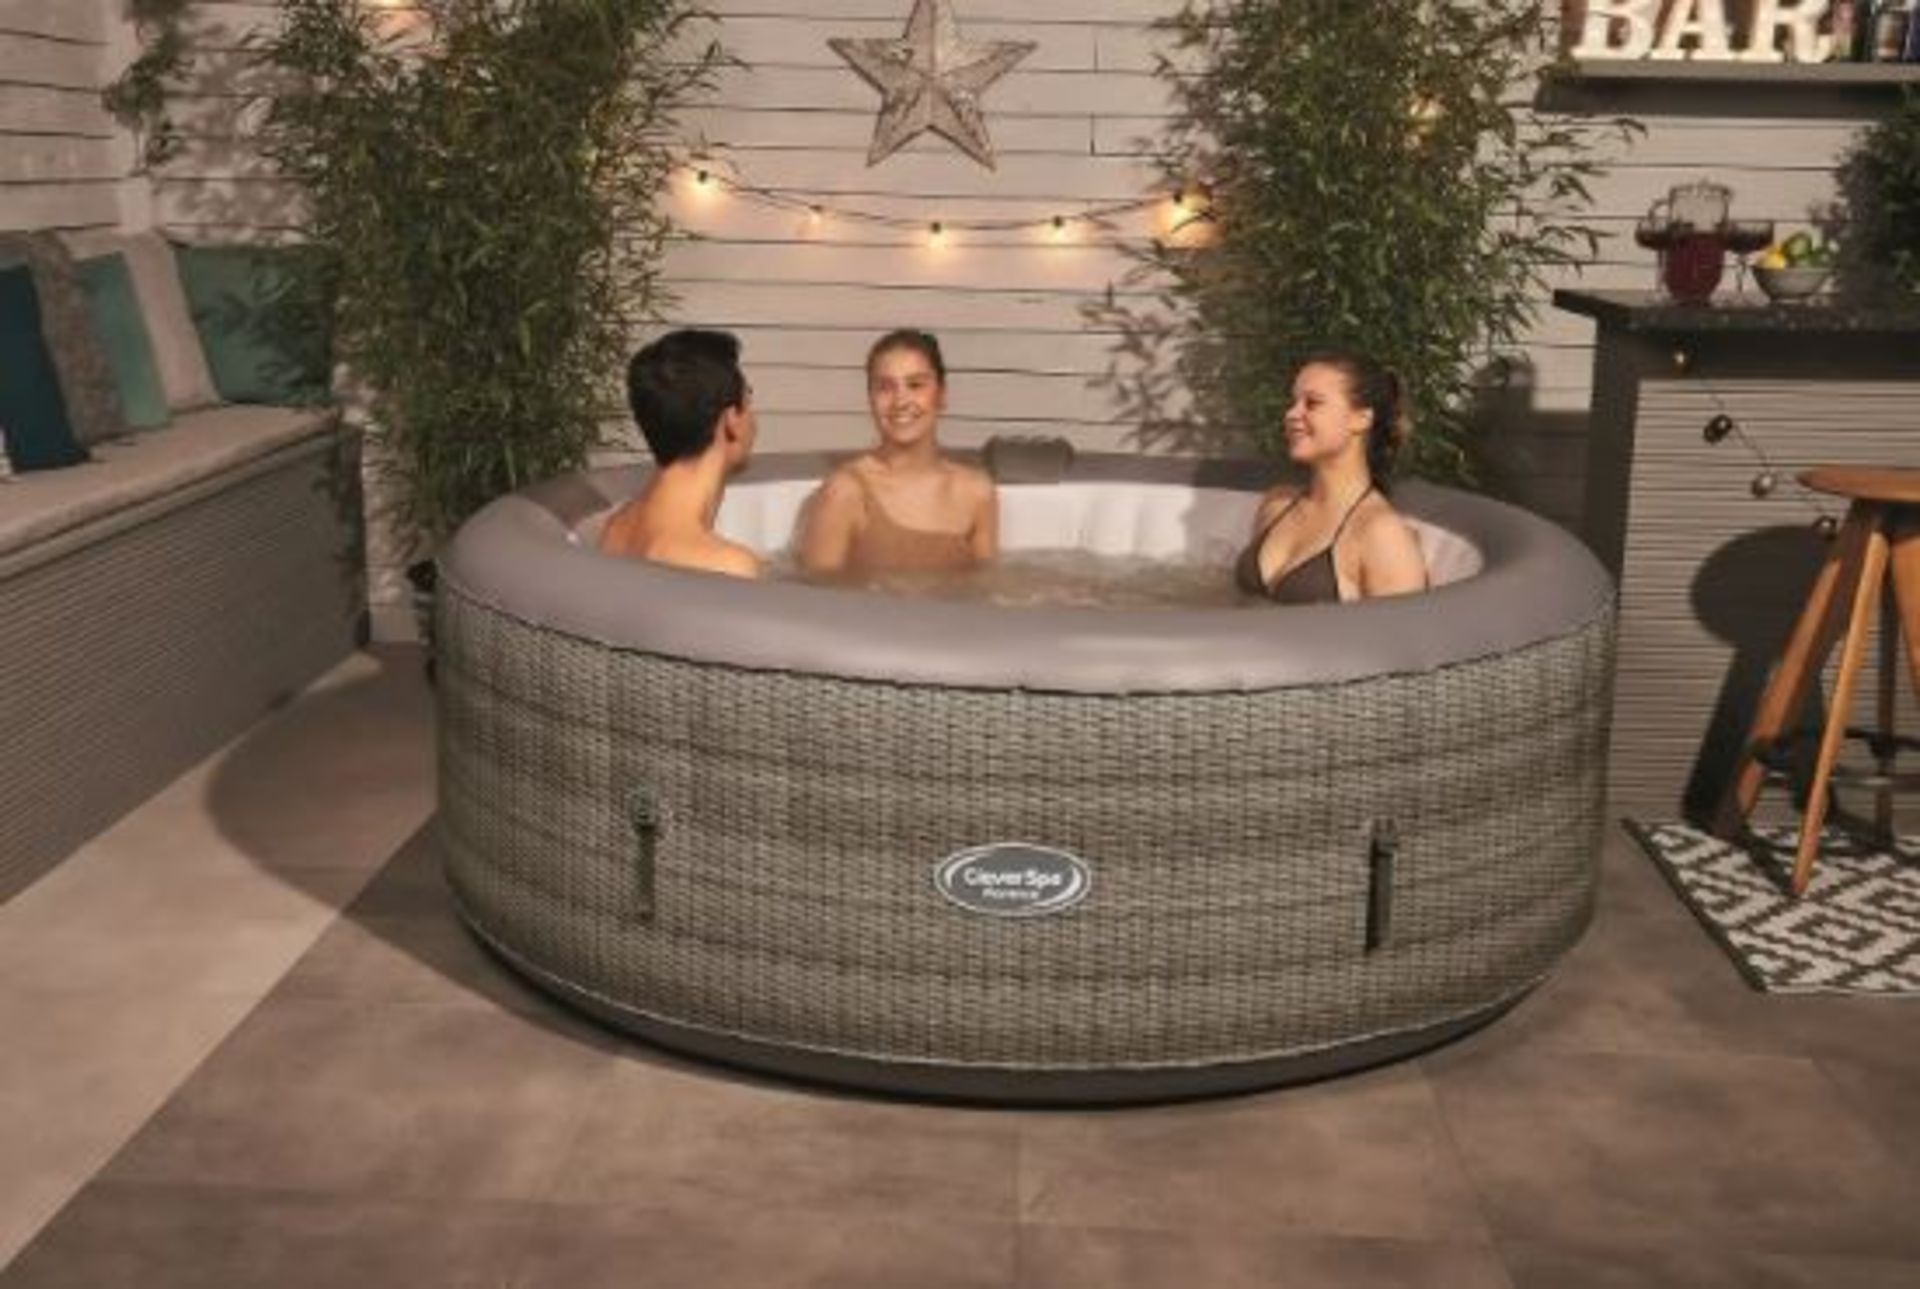 (R6E) 1x Cleverspa Florence 6 Person Hot Tub RRP £560.